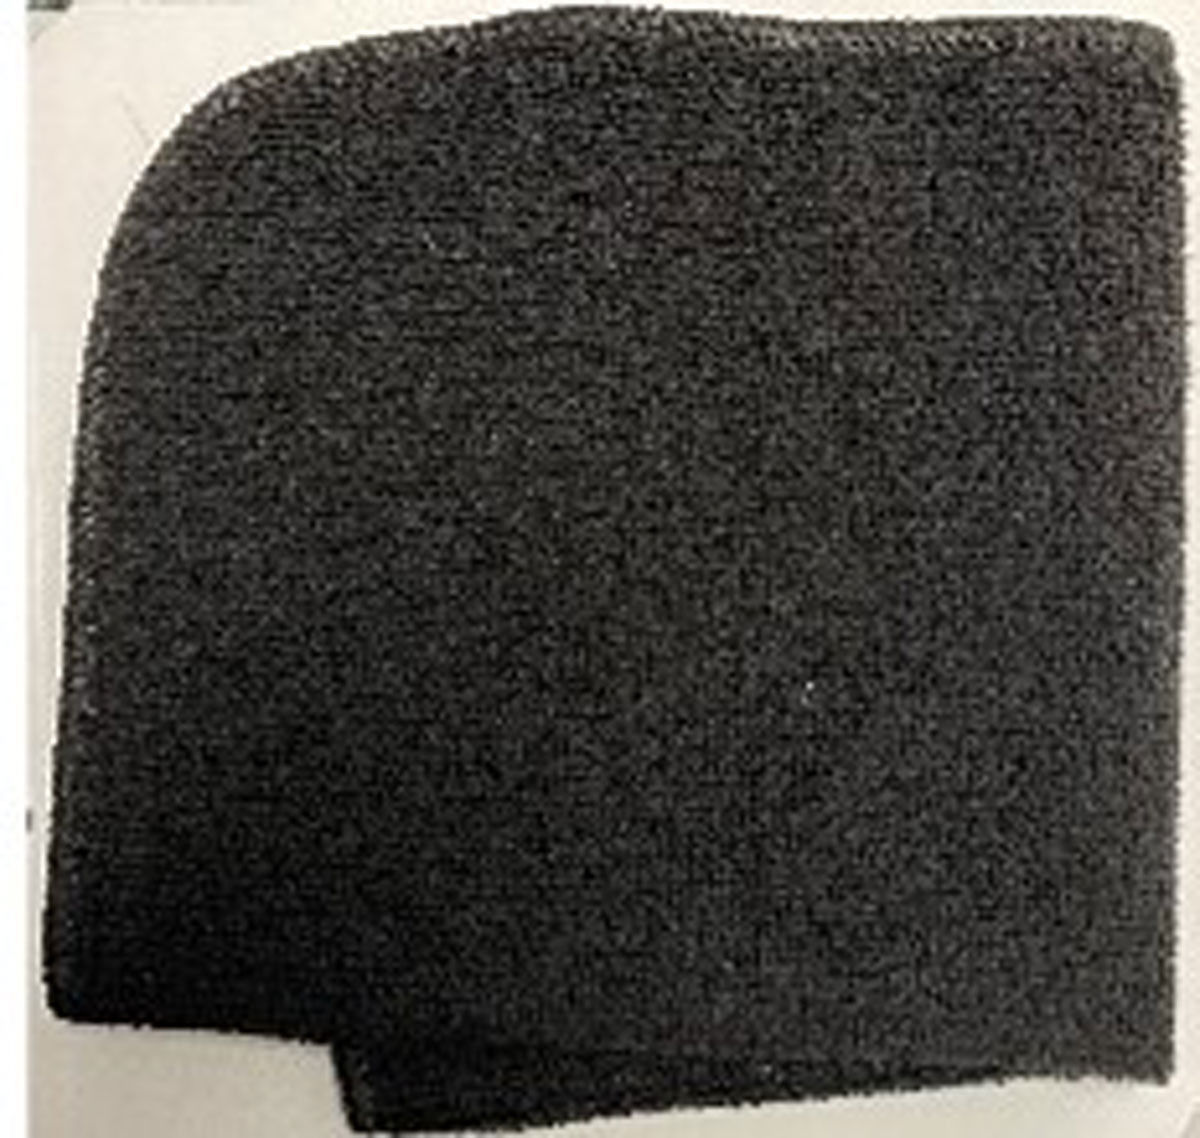 Do black microfiber towels dry quickly?